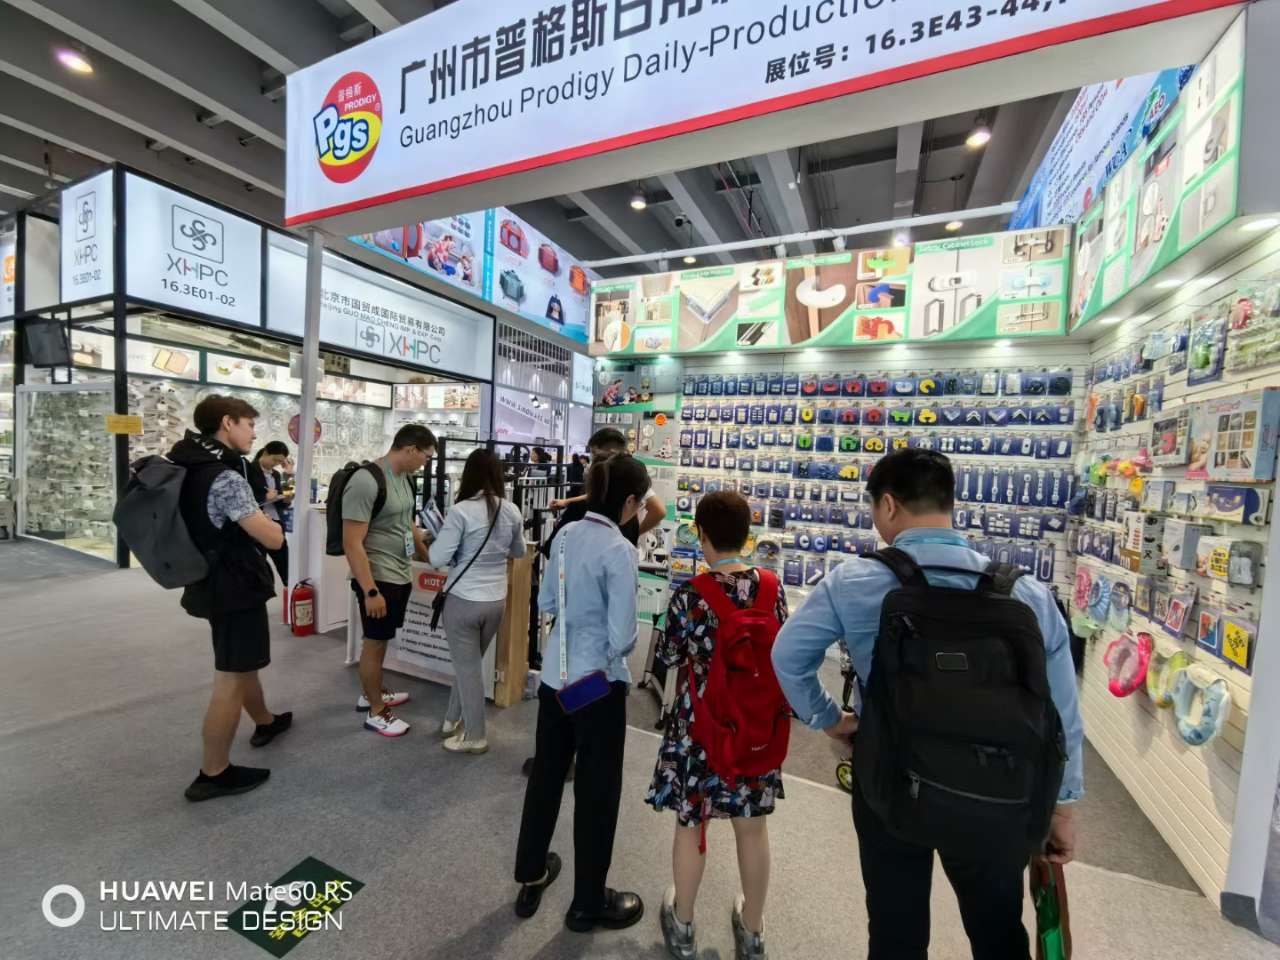 The offline exhibition of the Canton Fair is booming！